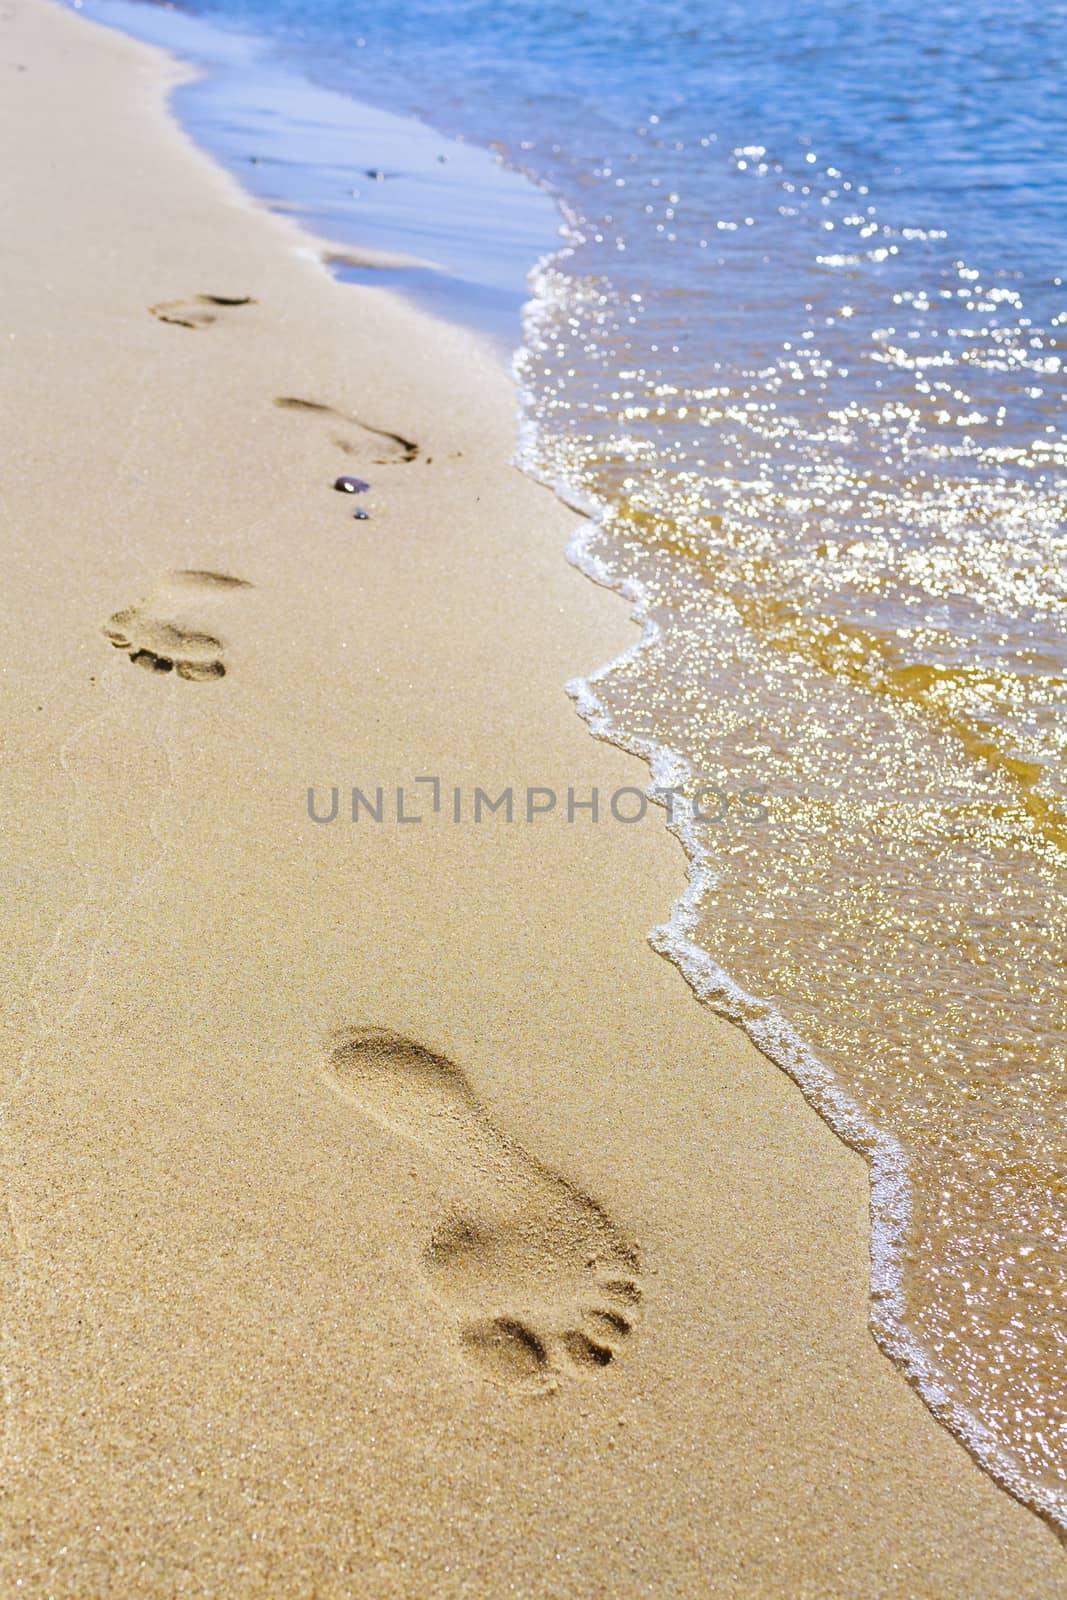 Clear footprints on the beach by the sea, visible yellow sand and blue sea.